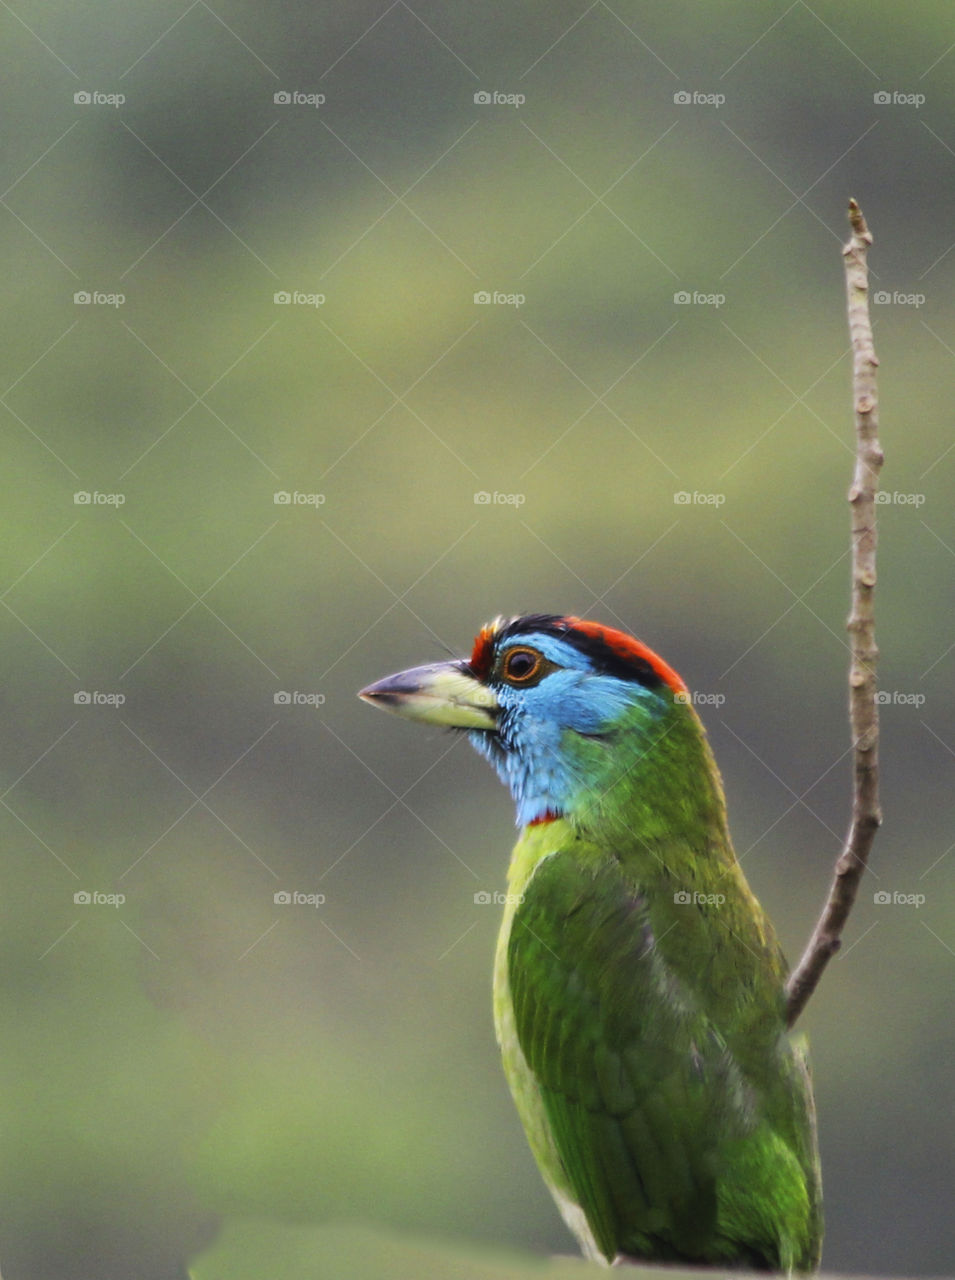 It's a blue throated barbet a common bird in Bd.